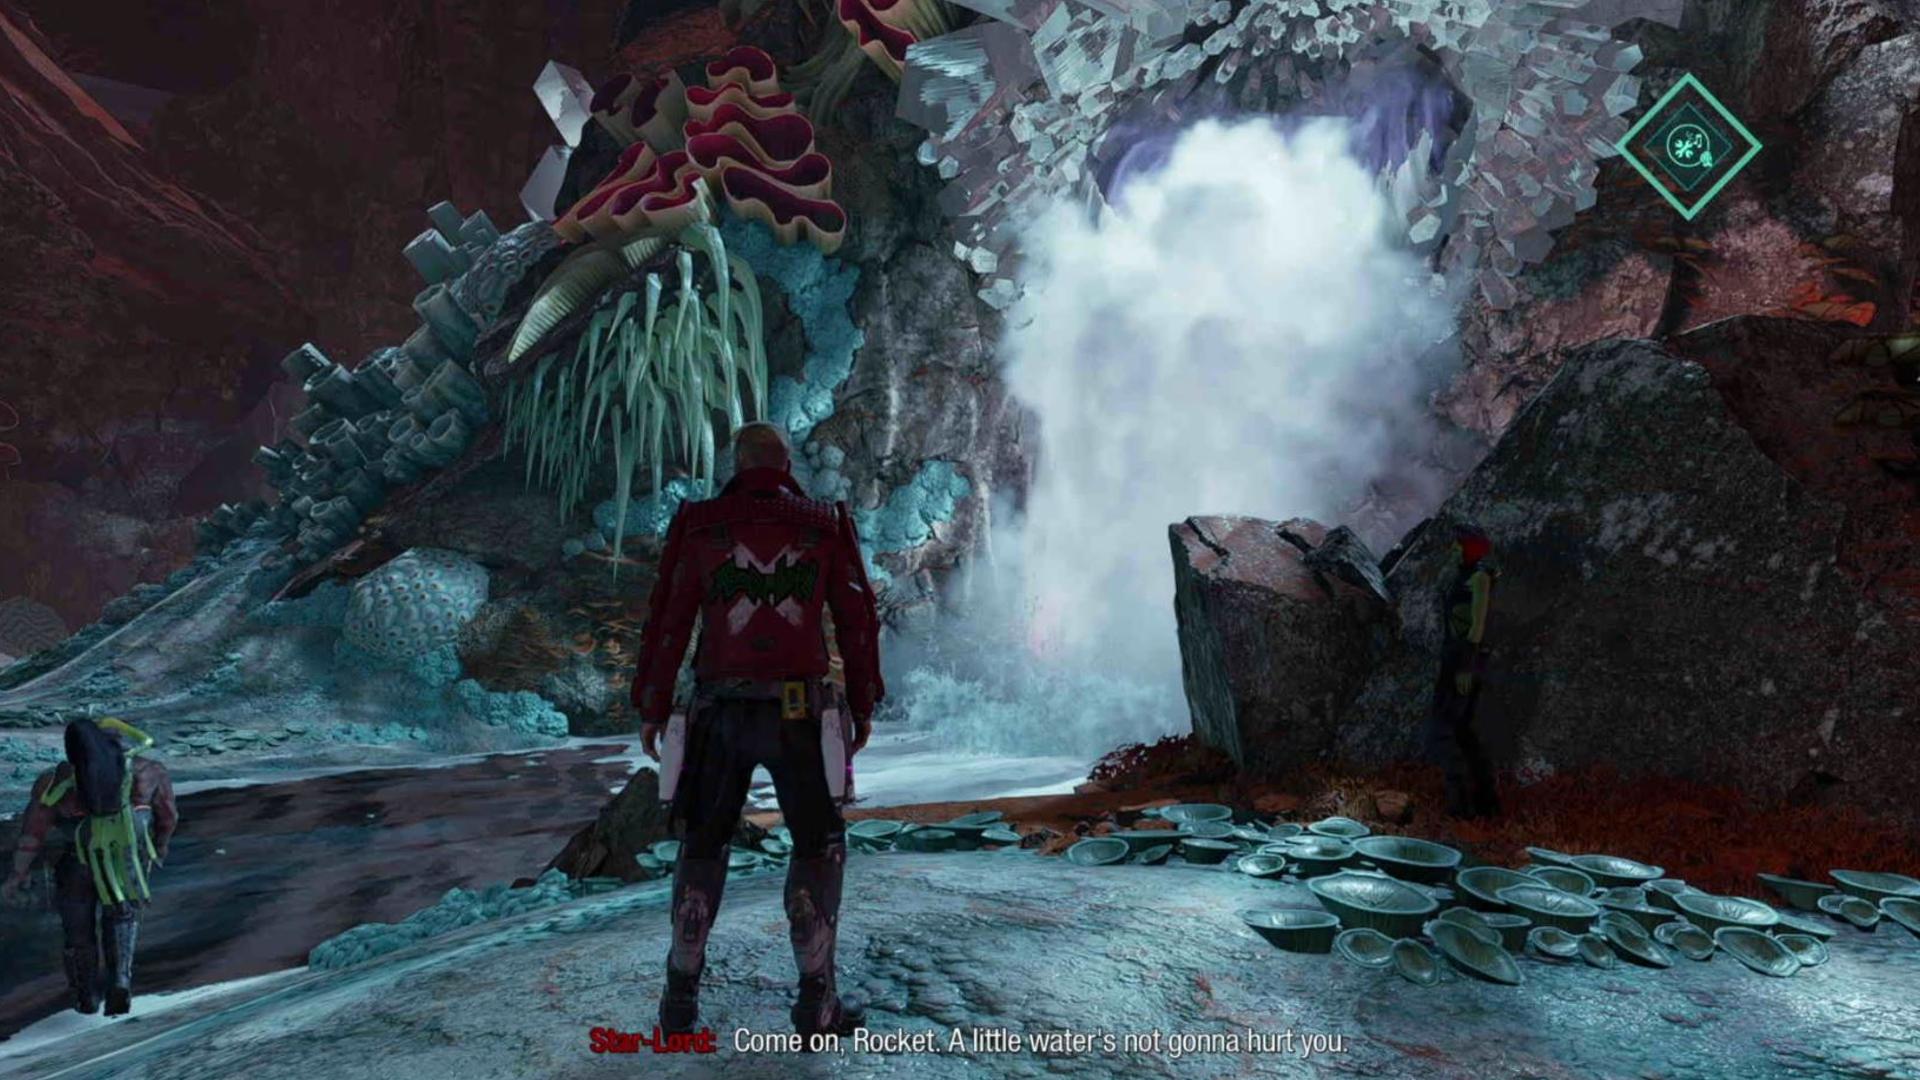 Guardians of the Galaxy outfit locations: Star-Lord is looking at the waterfall with the chest behind it.